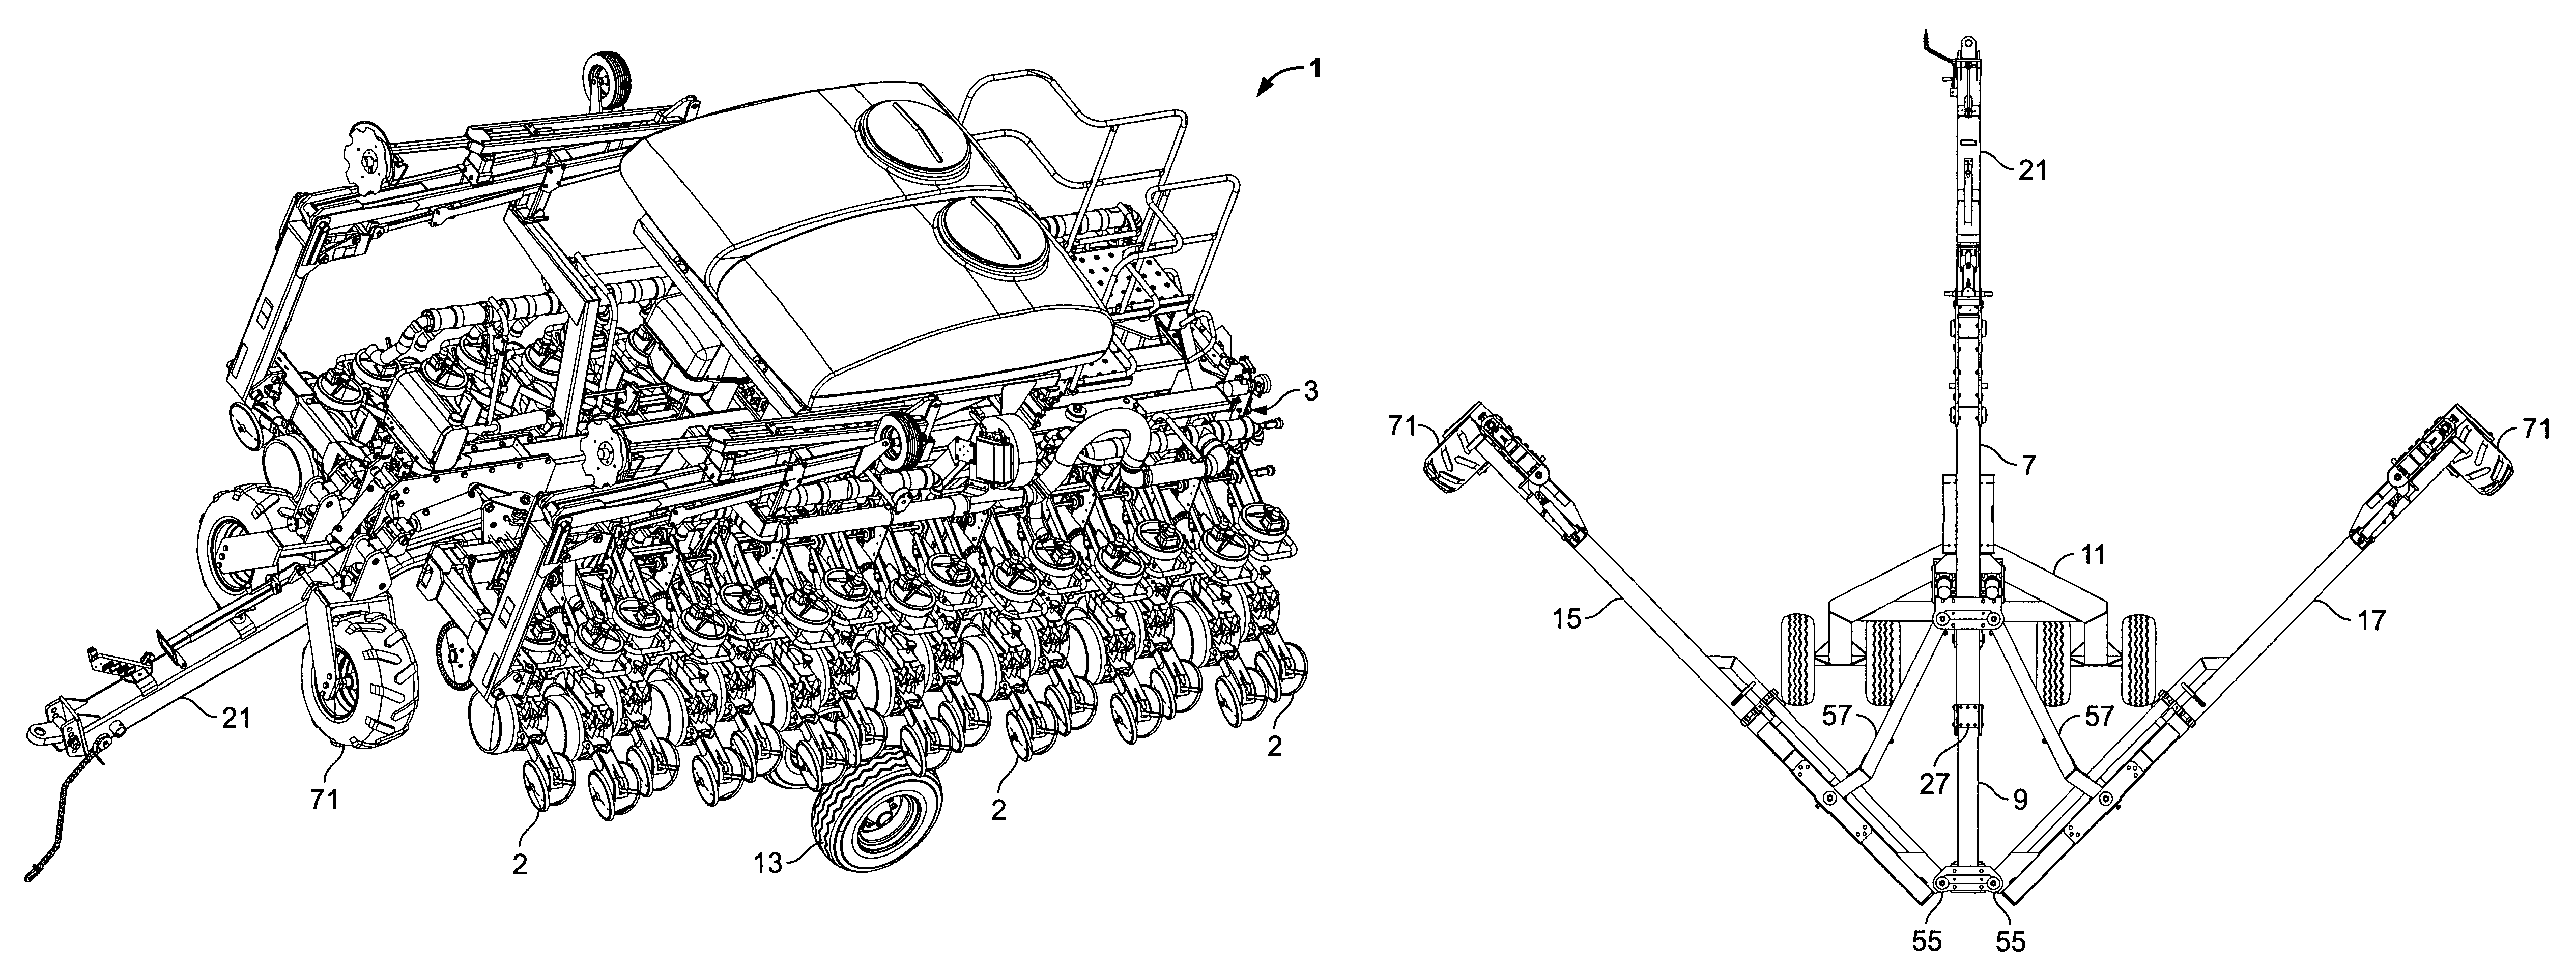 Front folding agricultural implement frame with rearwardly telescoping tongue